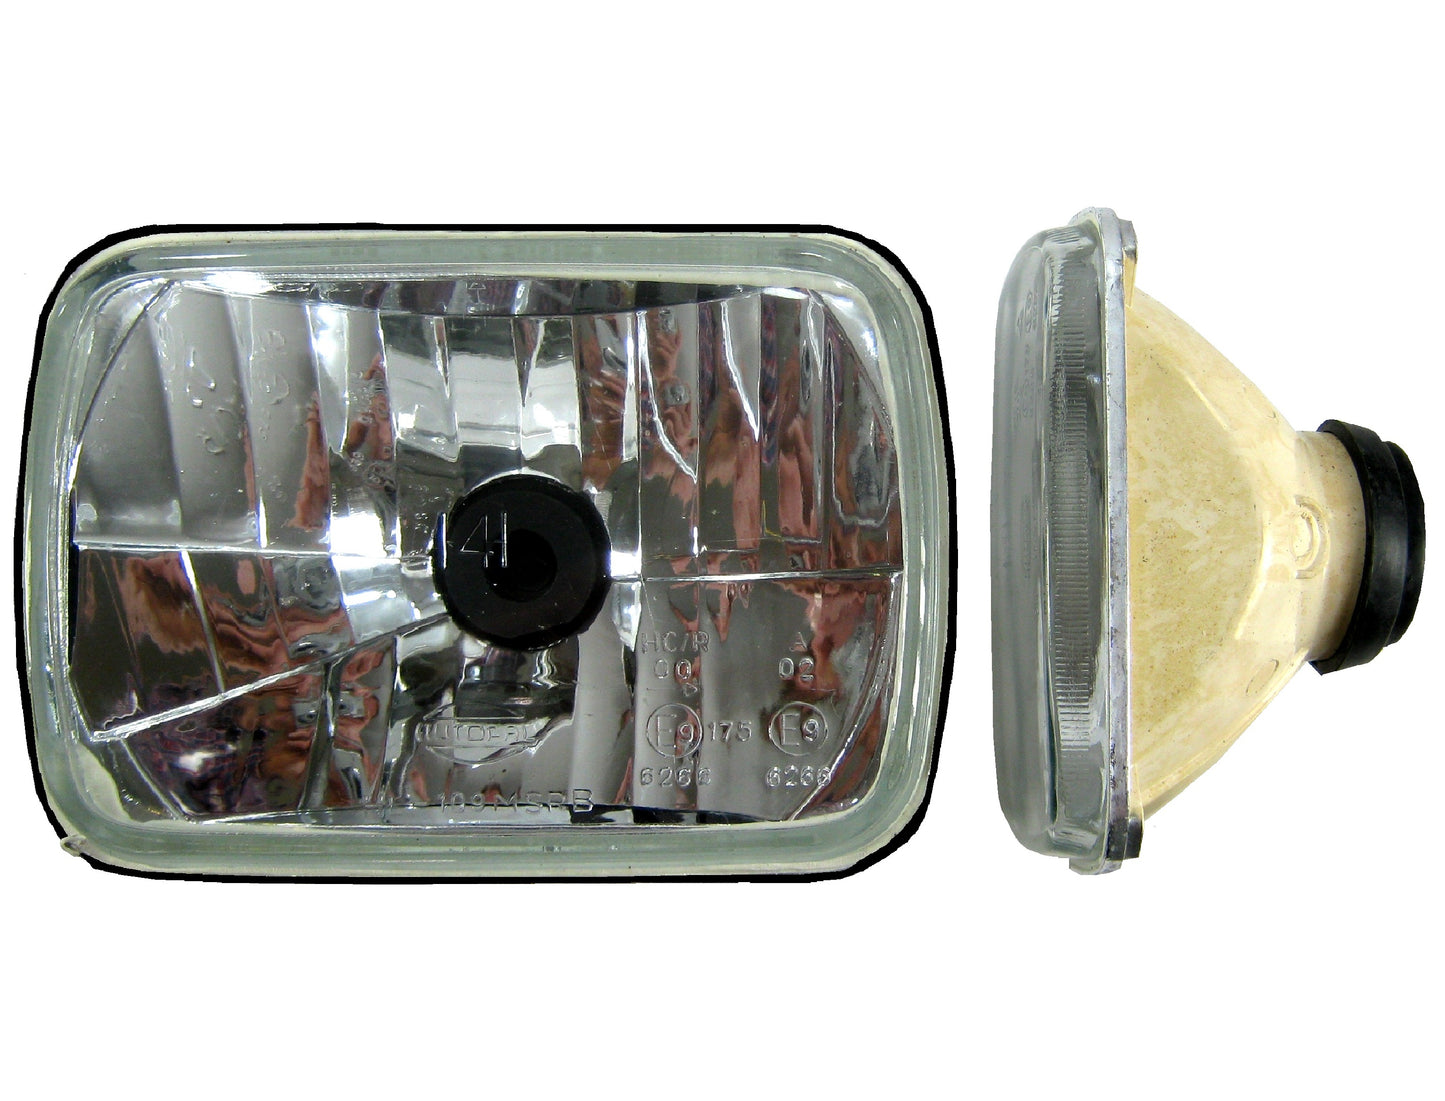 Crystal Headlight Upgrade (Pair) with E Mark - RHD - for Toyota Hilux Surf